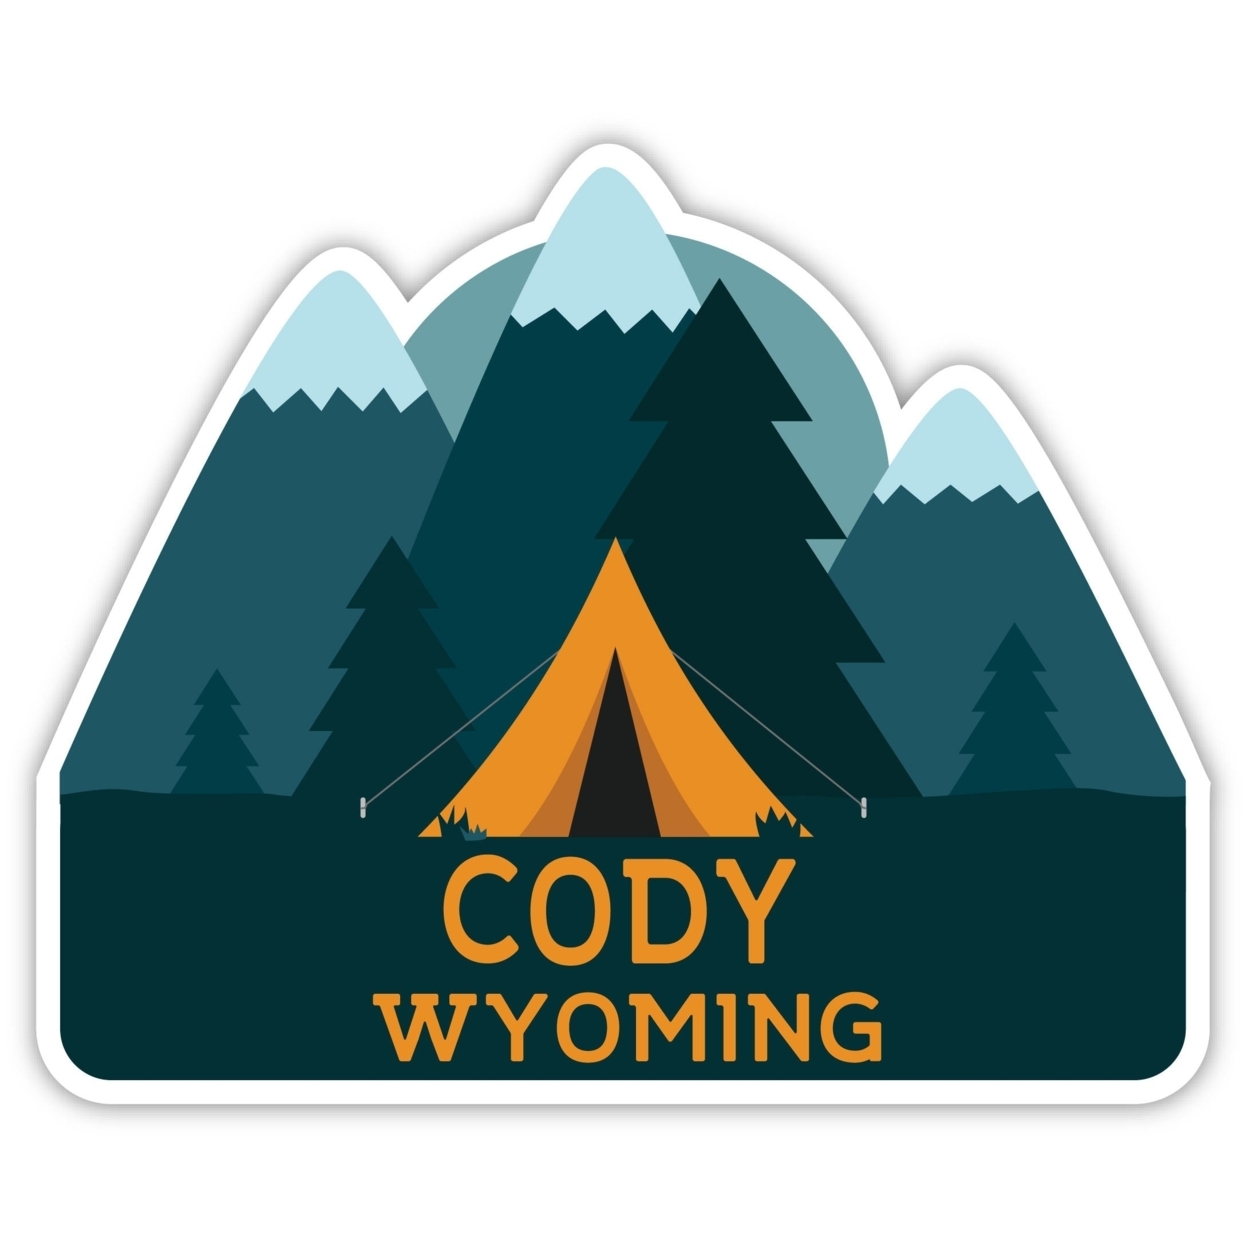 Cody Wyoming Souvenir Decorative Stickers (Choose Theme And Size) - Single Unit, 12-Inch, Camp Life